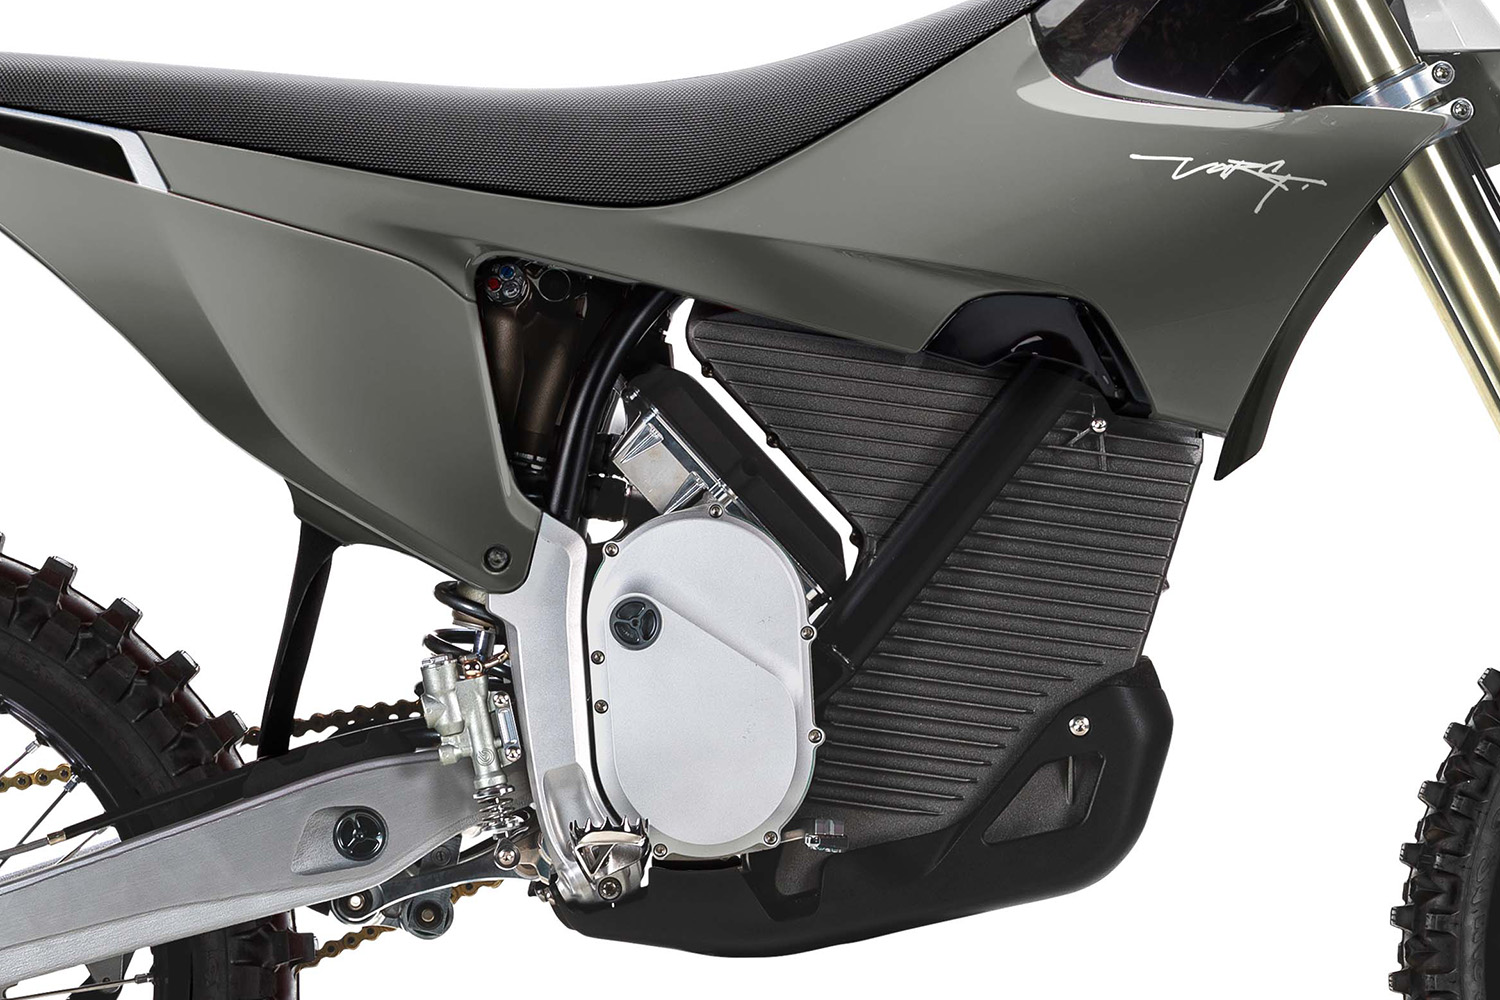 Closer look: Stark VARG electric off-road motorcycle technical details